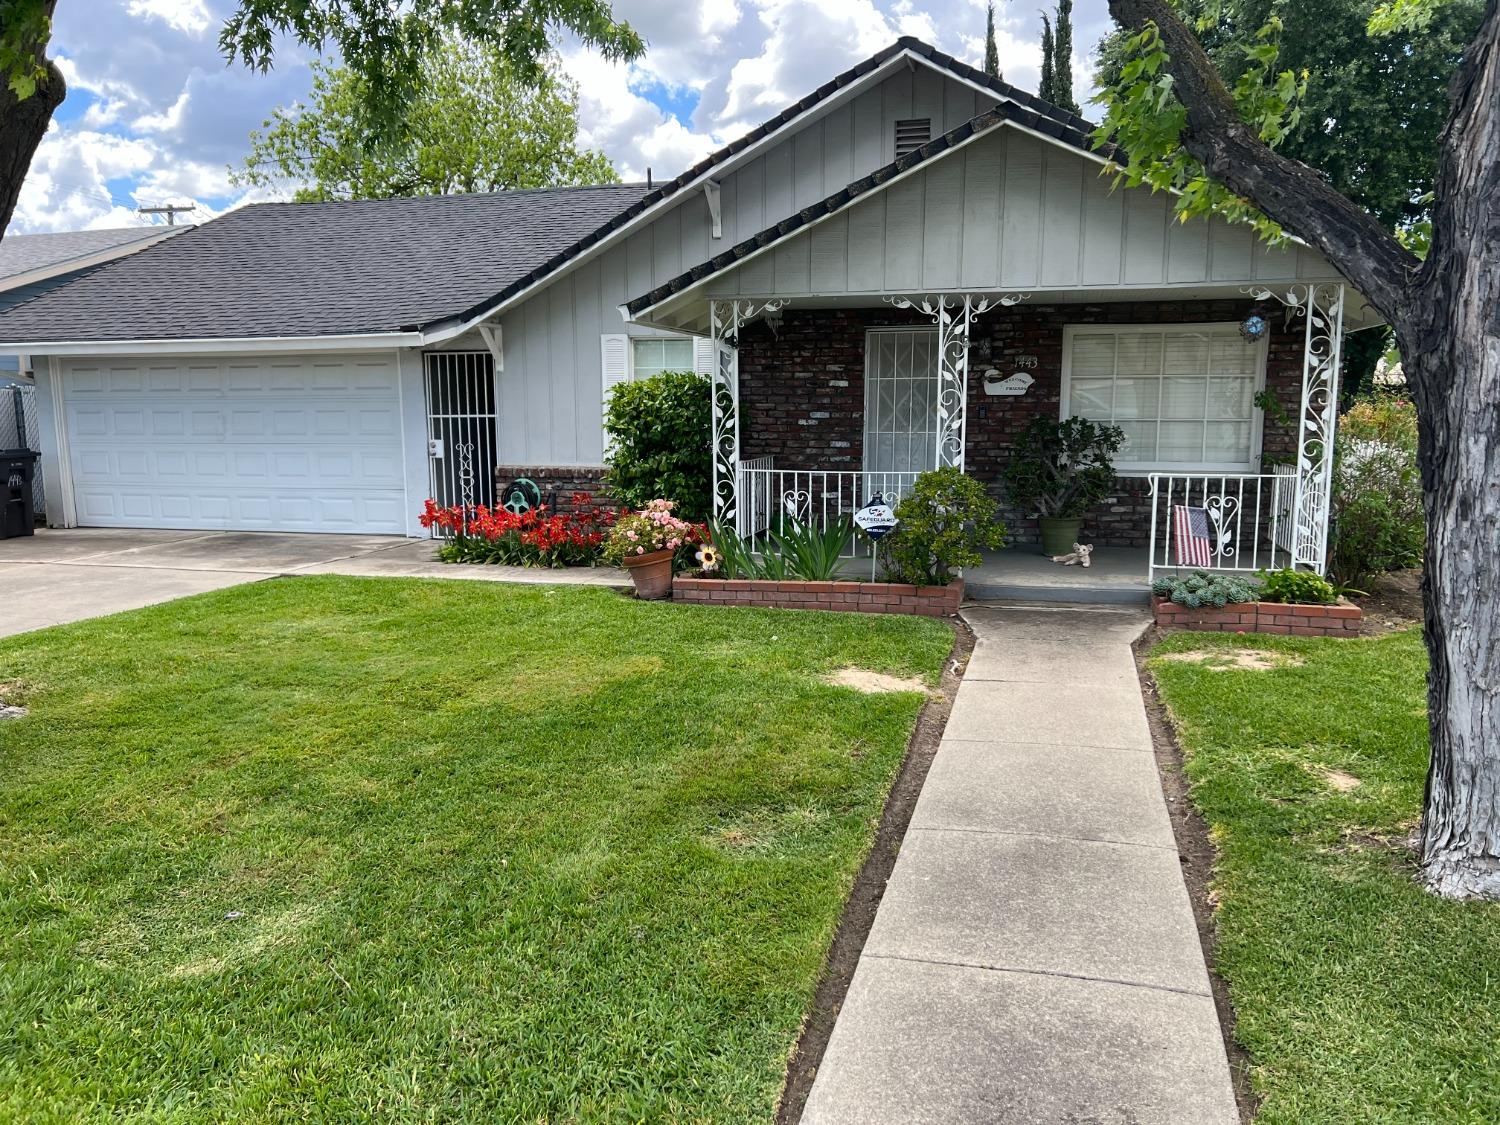 Photo of 1444 N D St in Stockton, CA